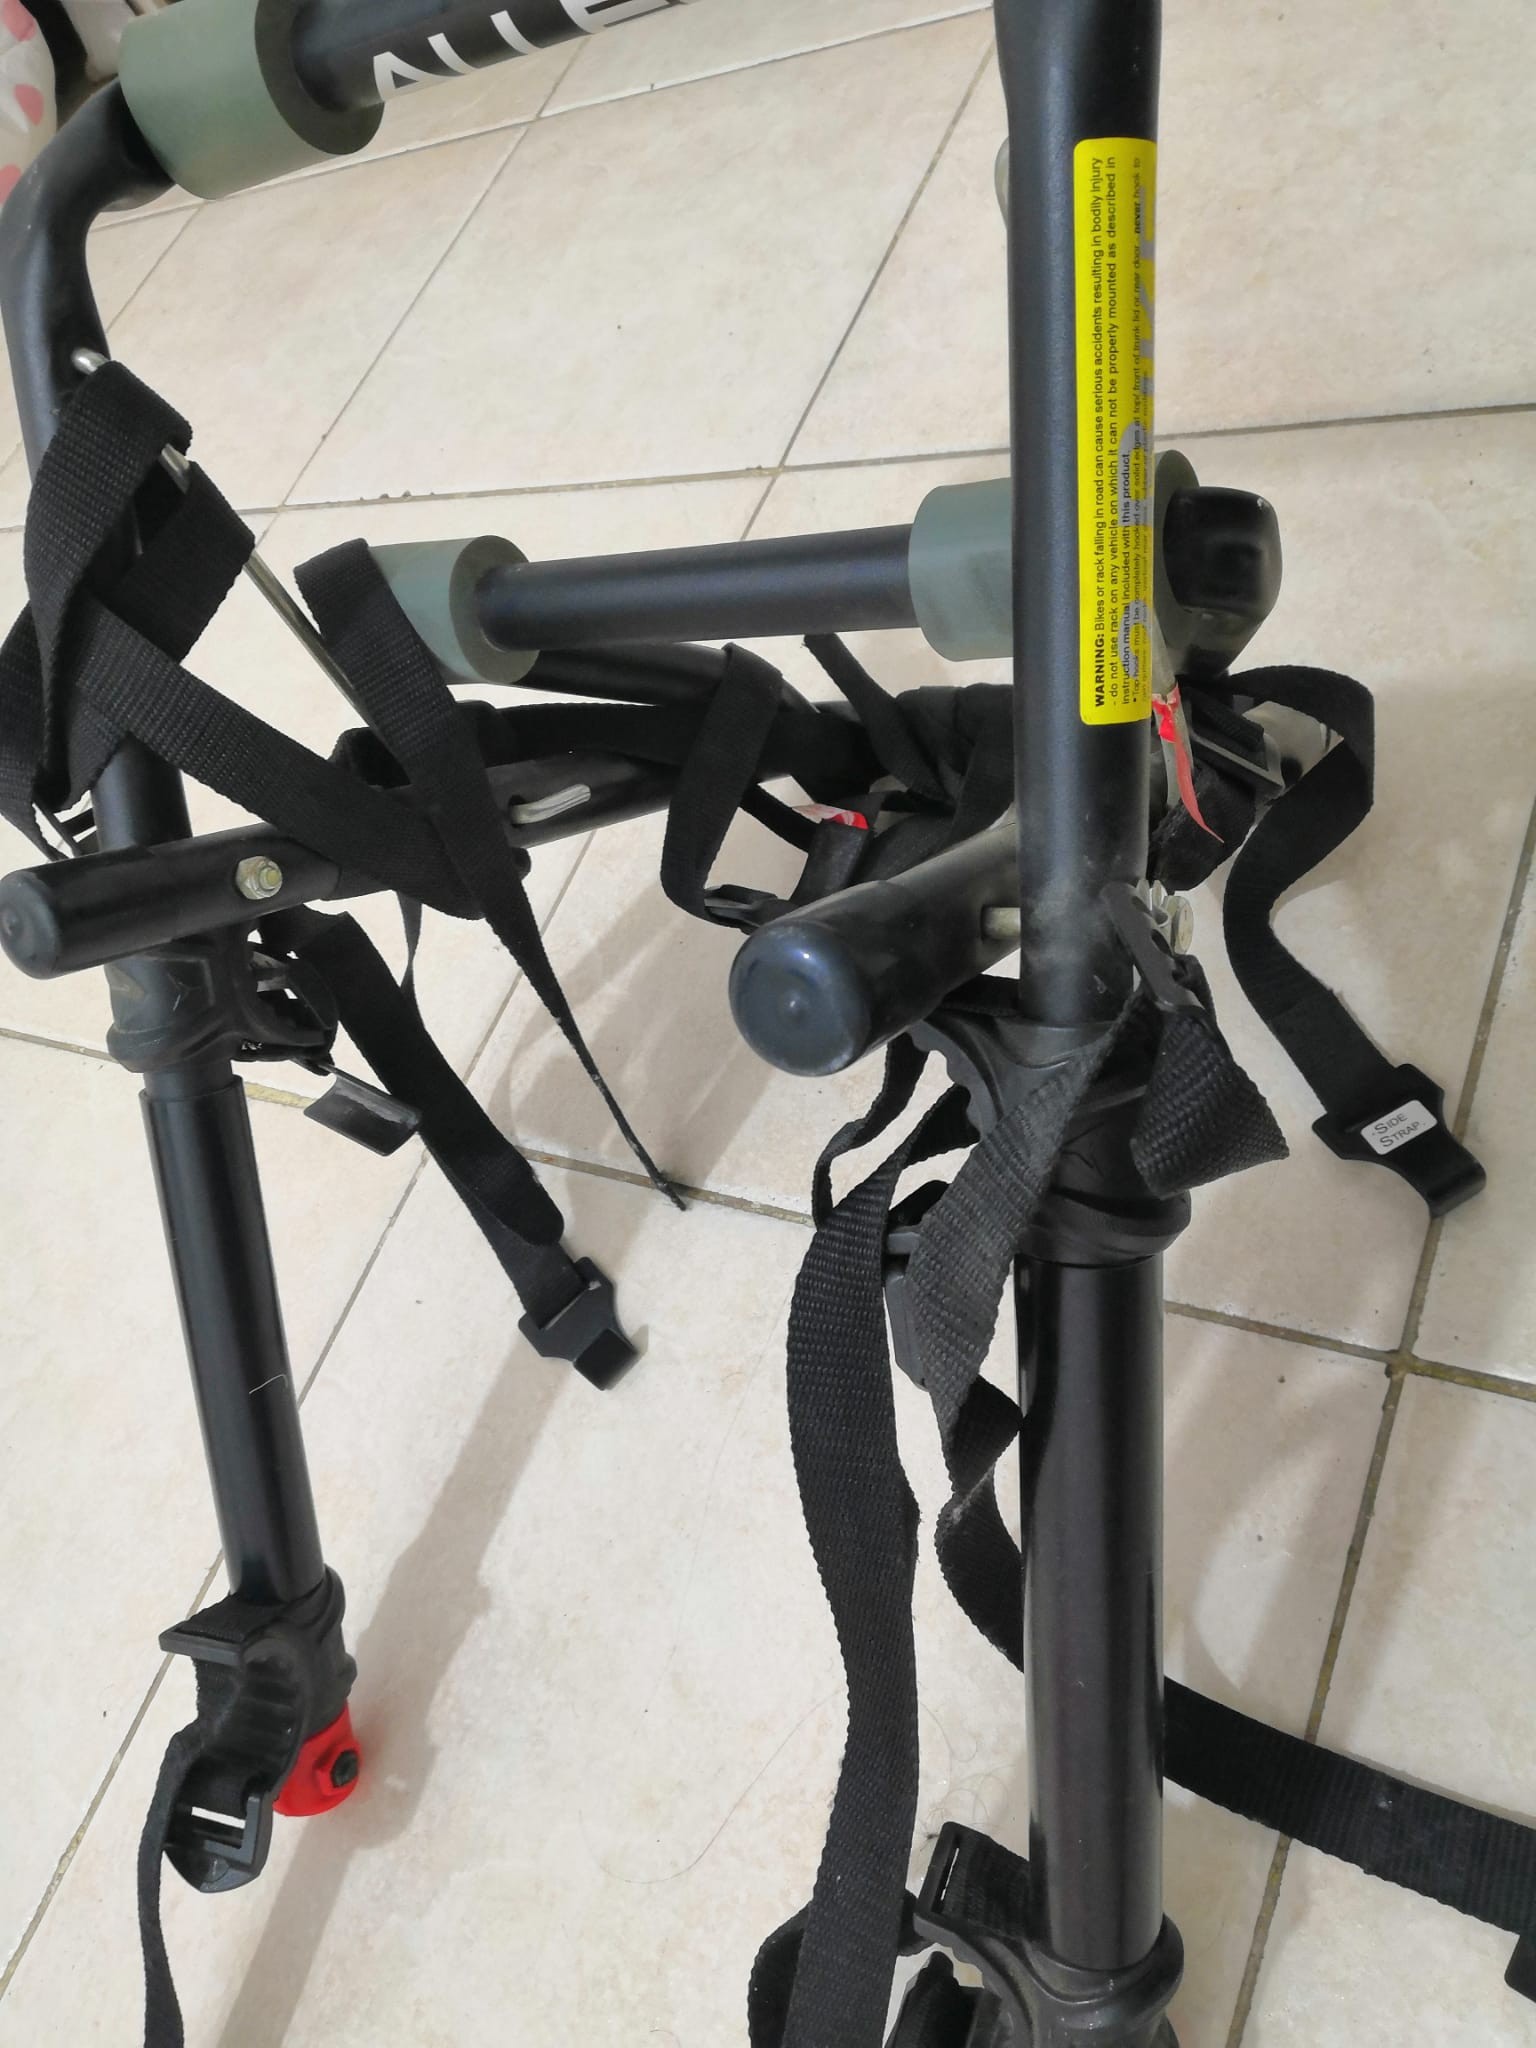 Car bicycle stand rarely used